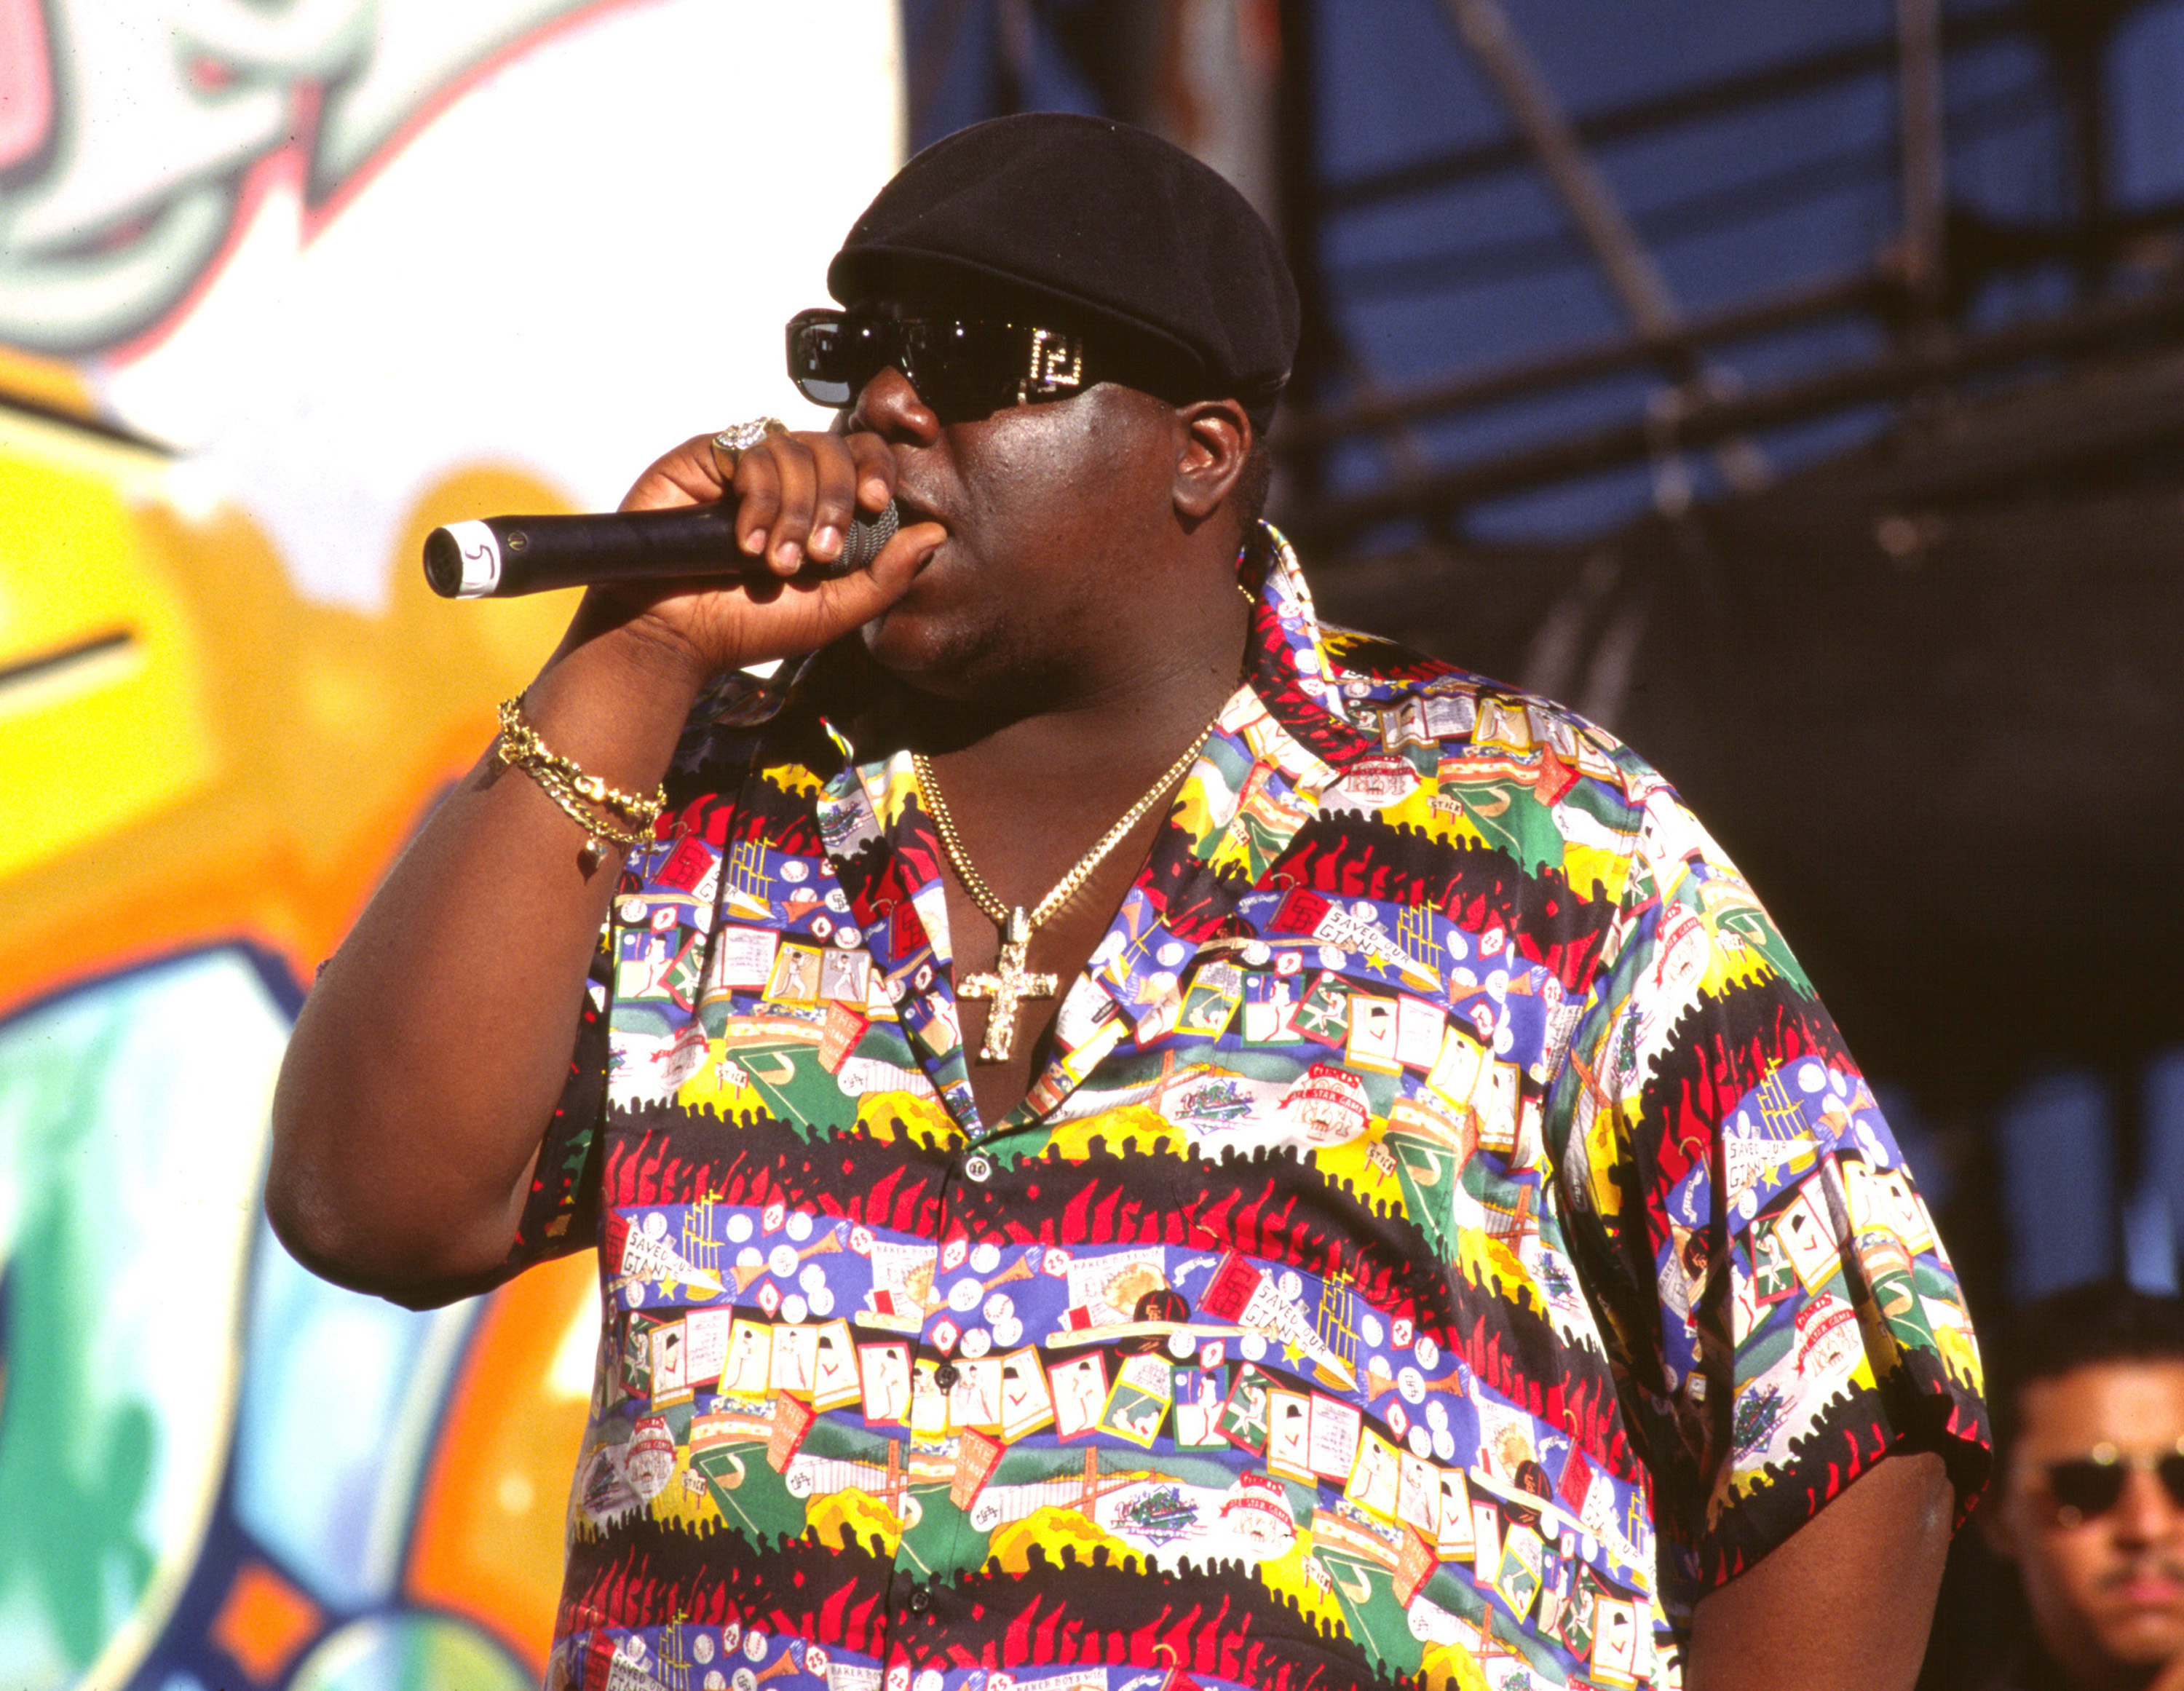 The Notorious B.I.G. with a microphone